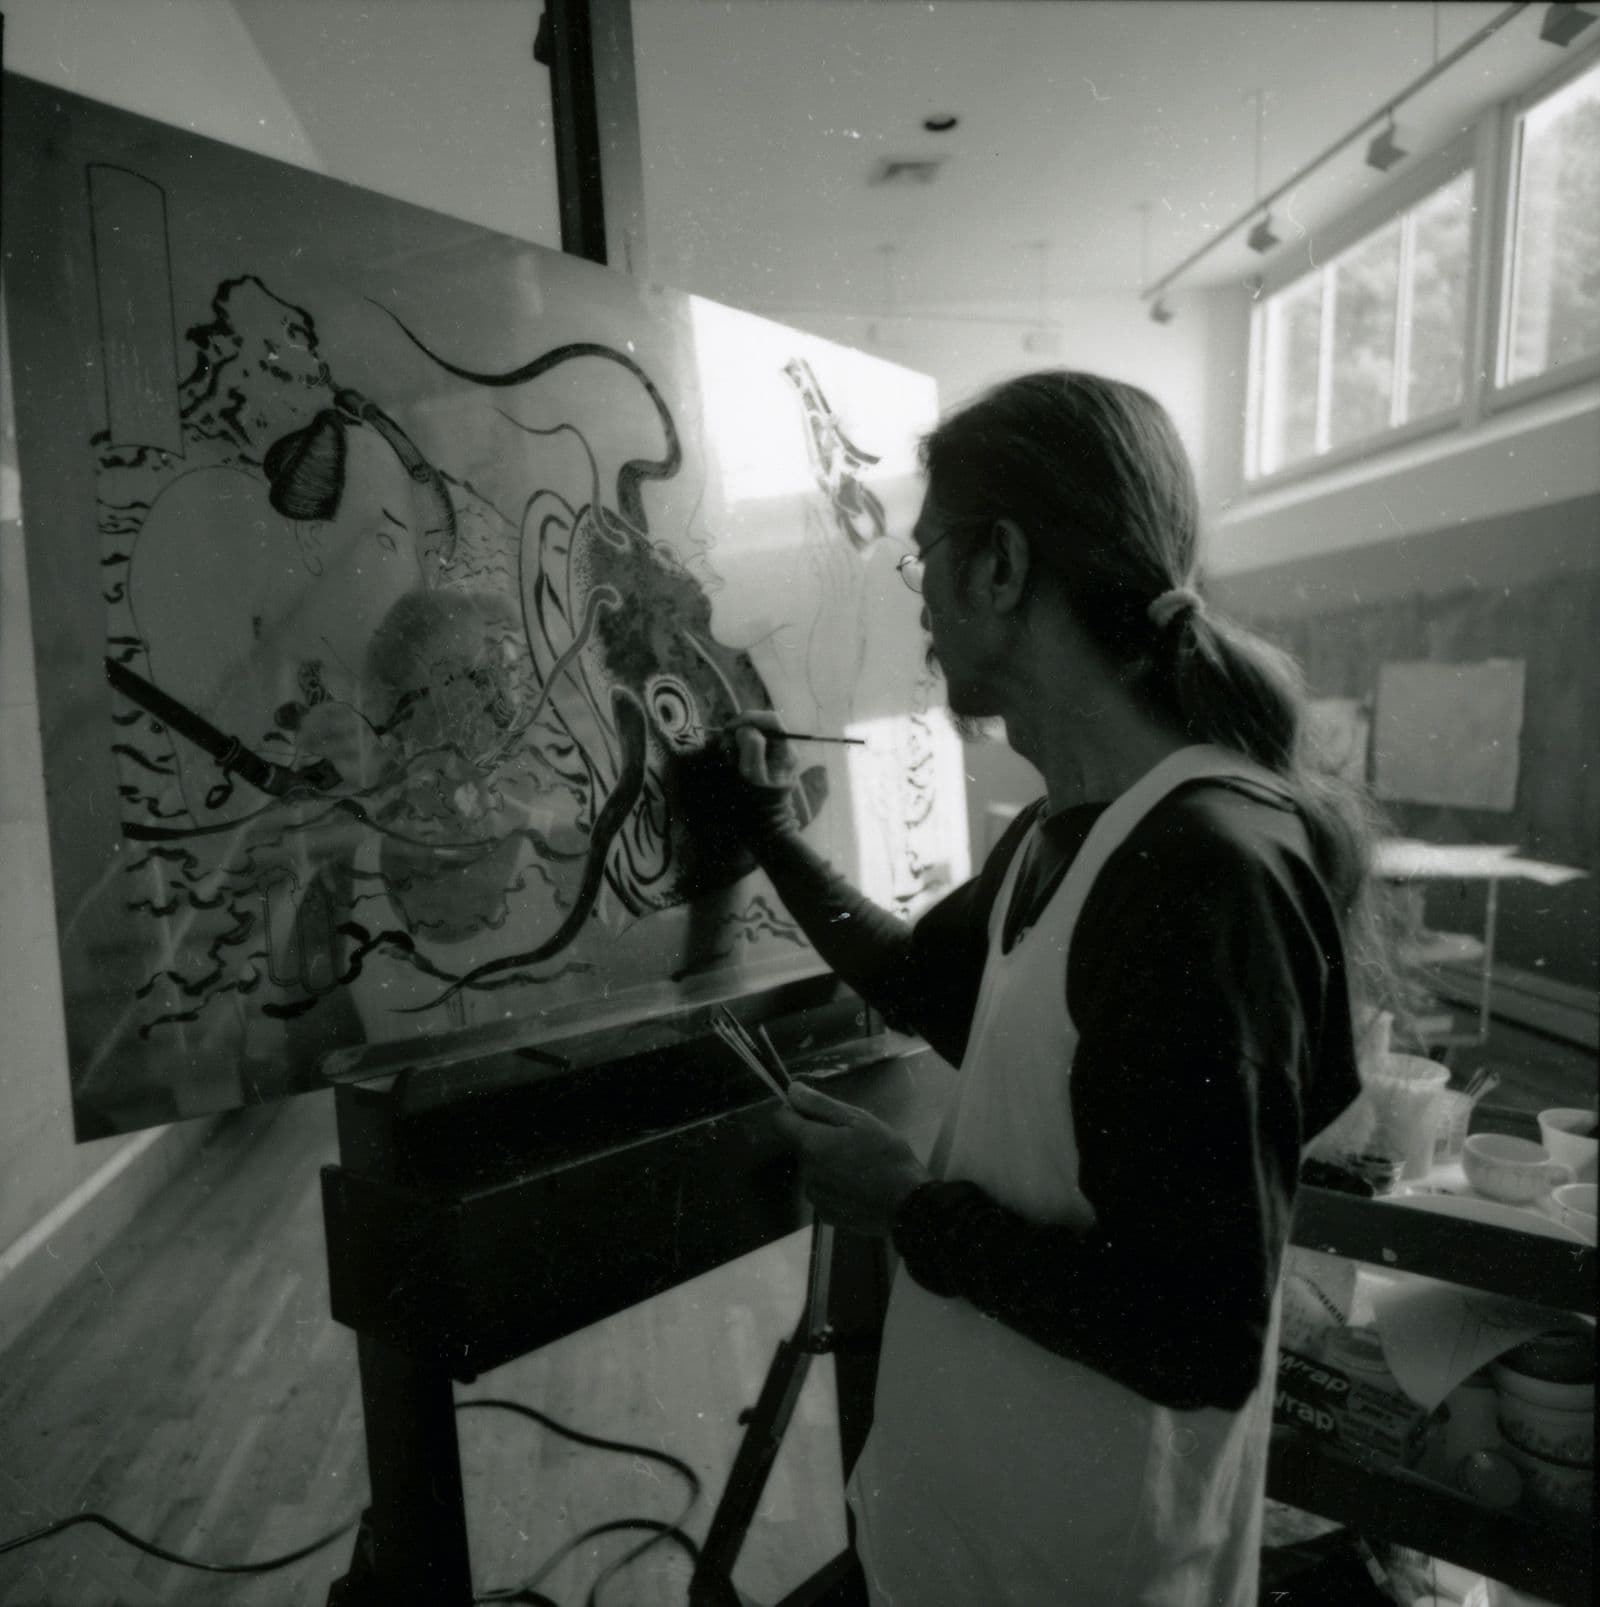 A blurry black and white photograph of Masami Teraoka painting.